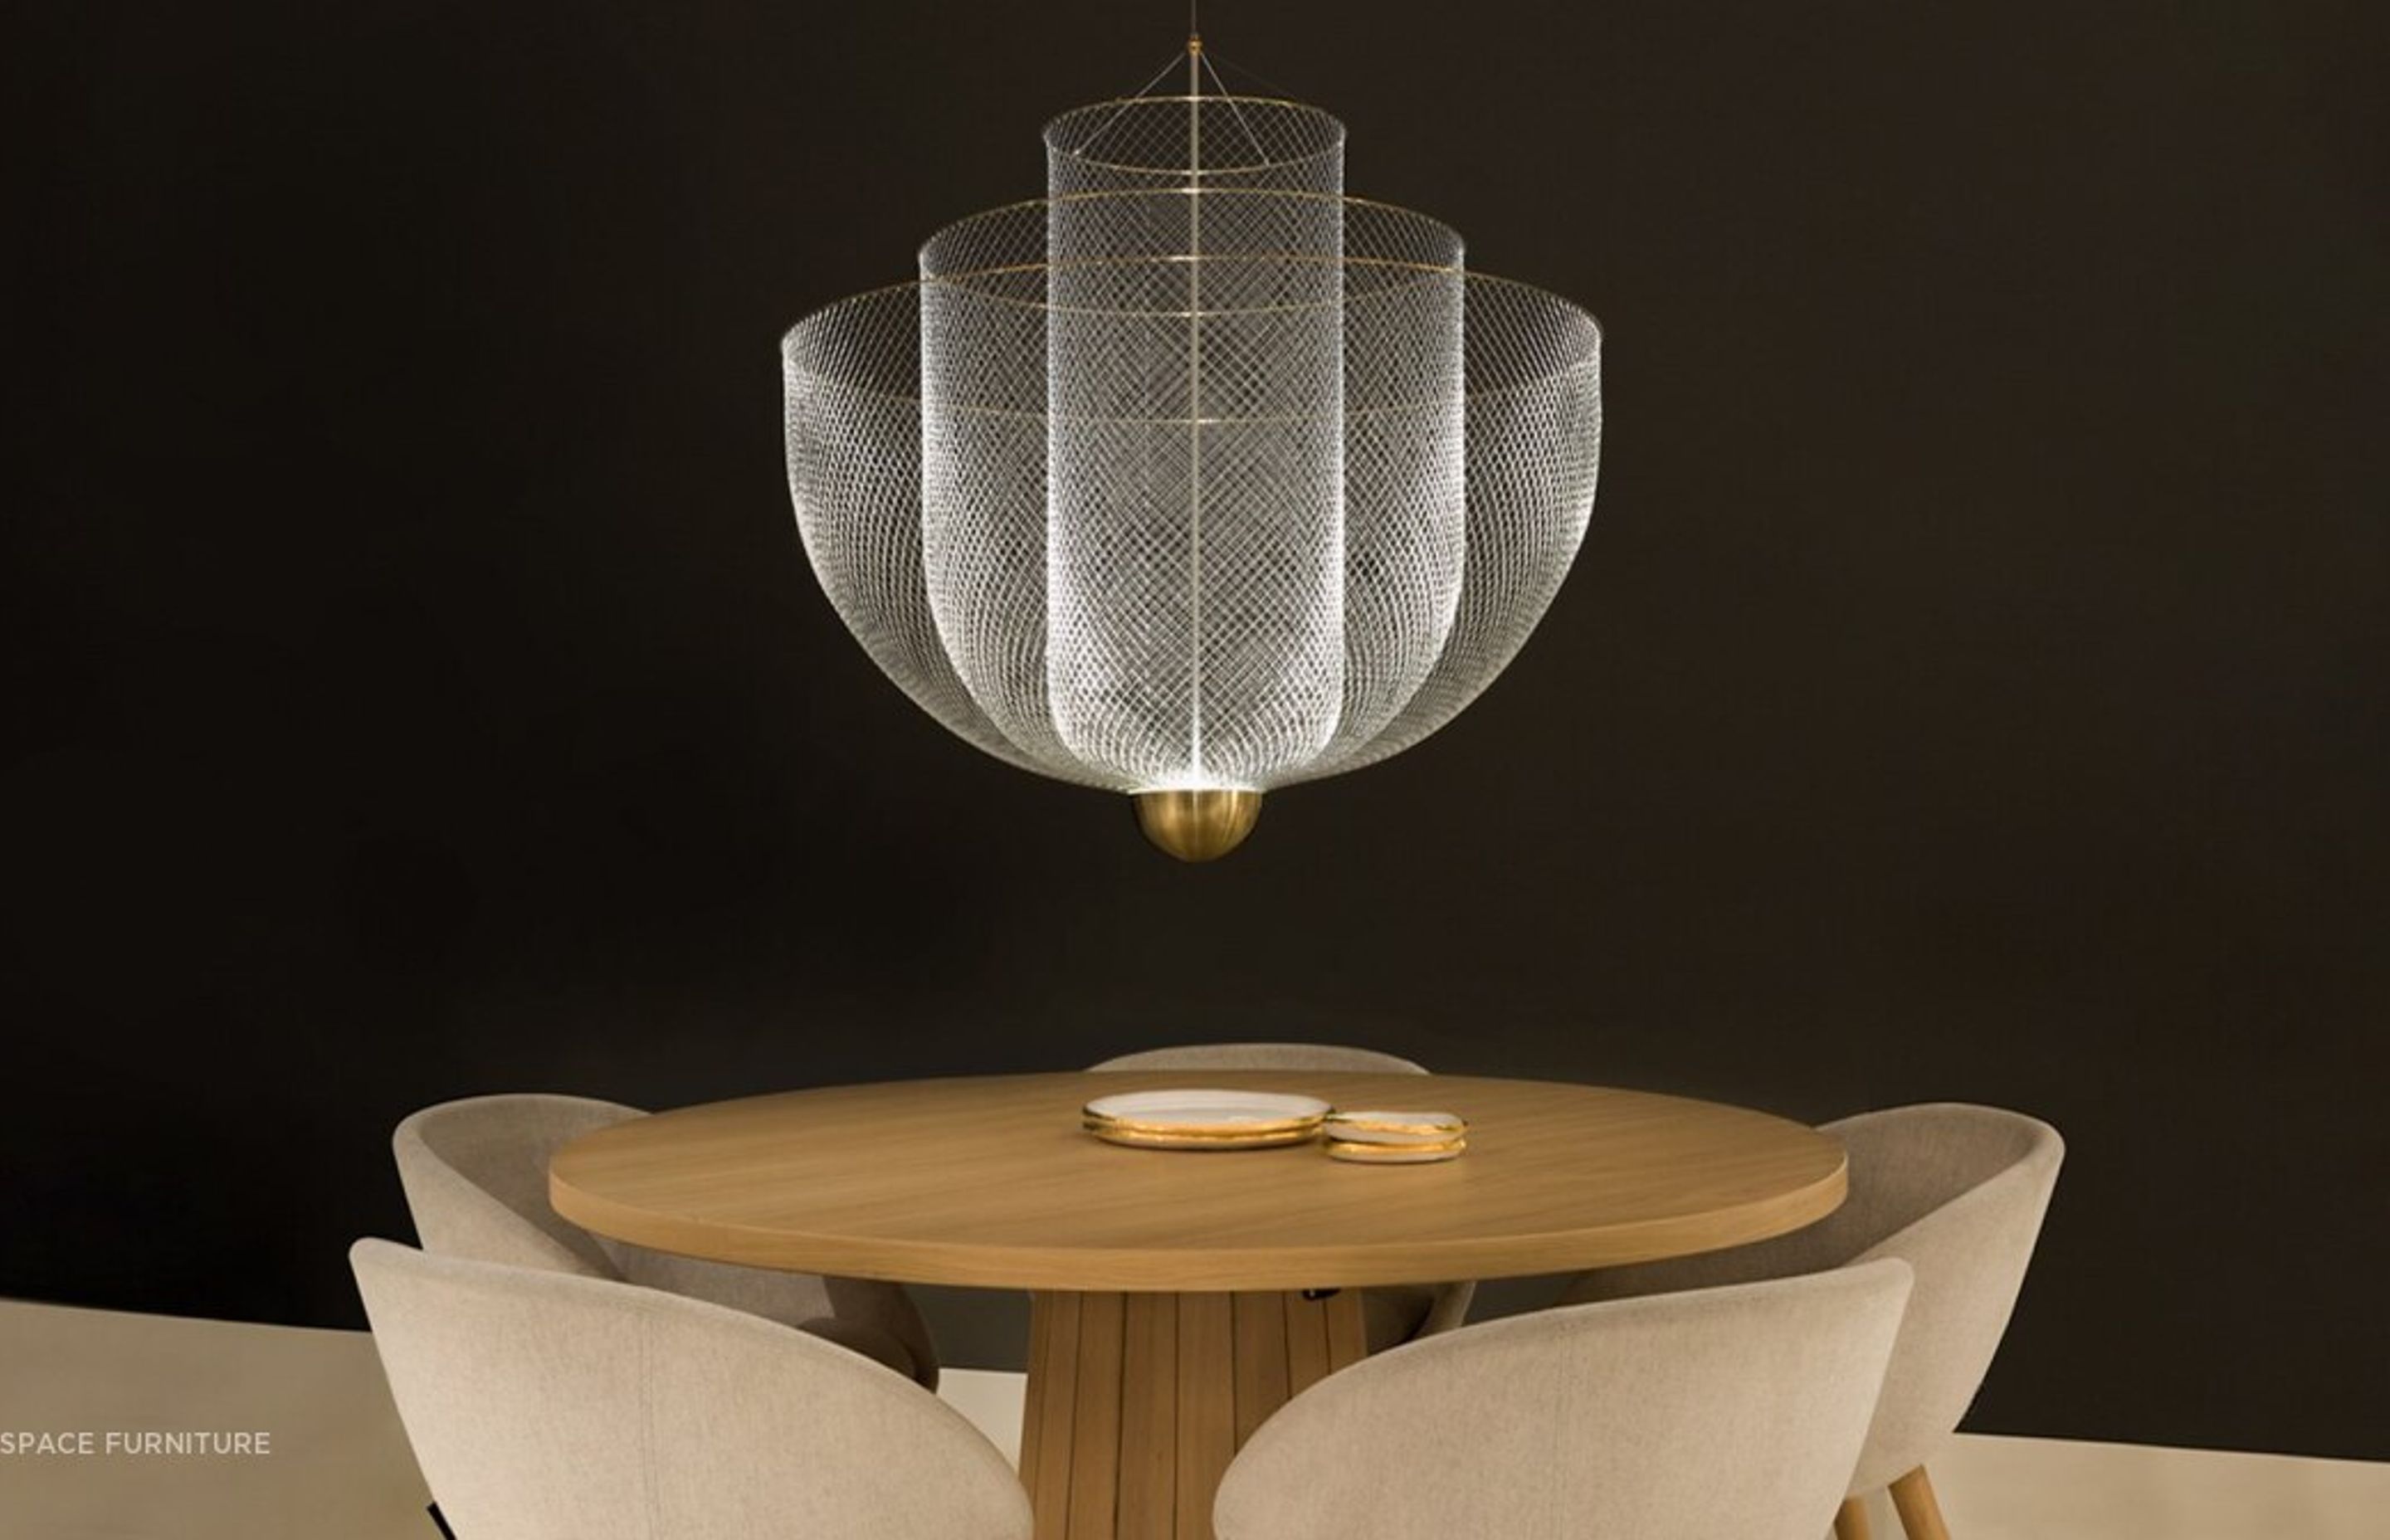 Space Furniture - Meshmatic Chandelier